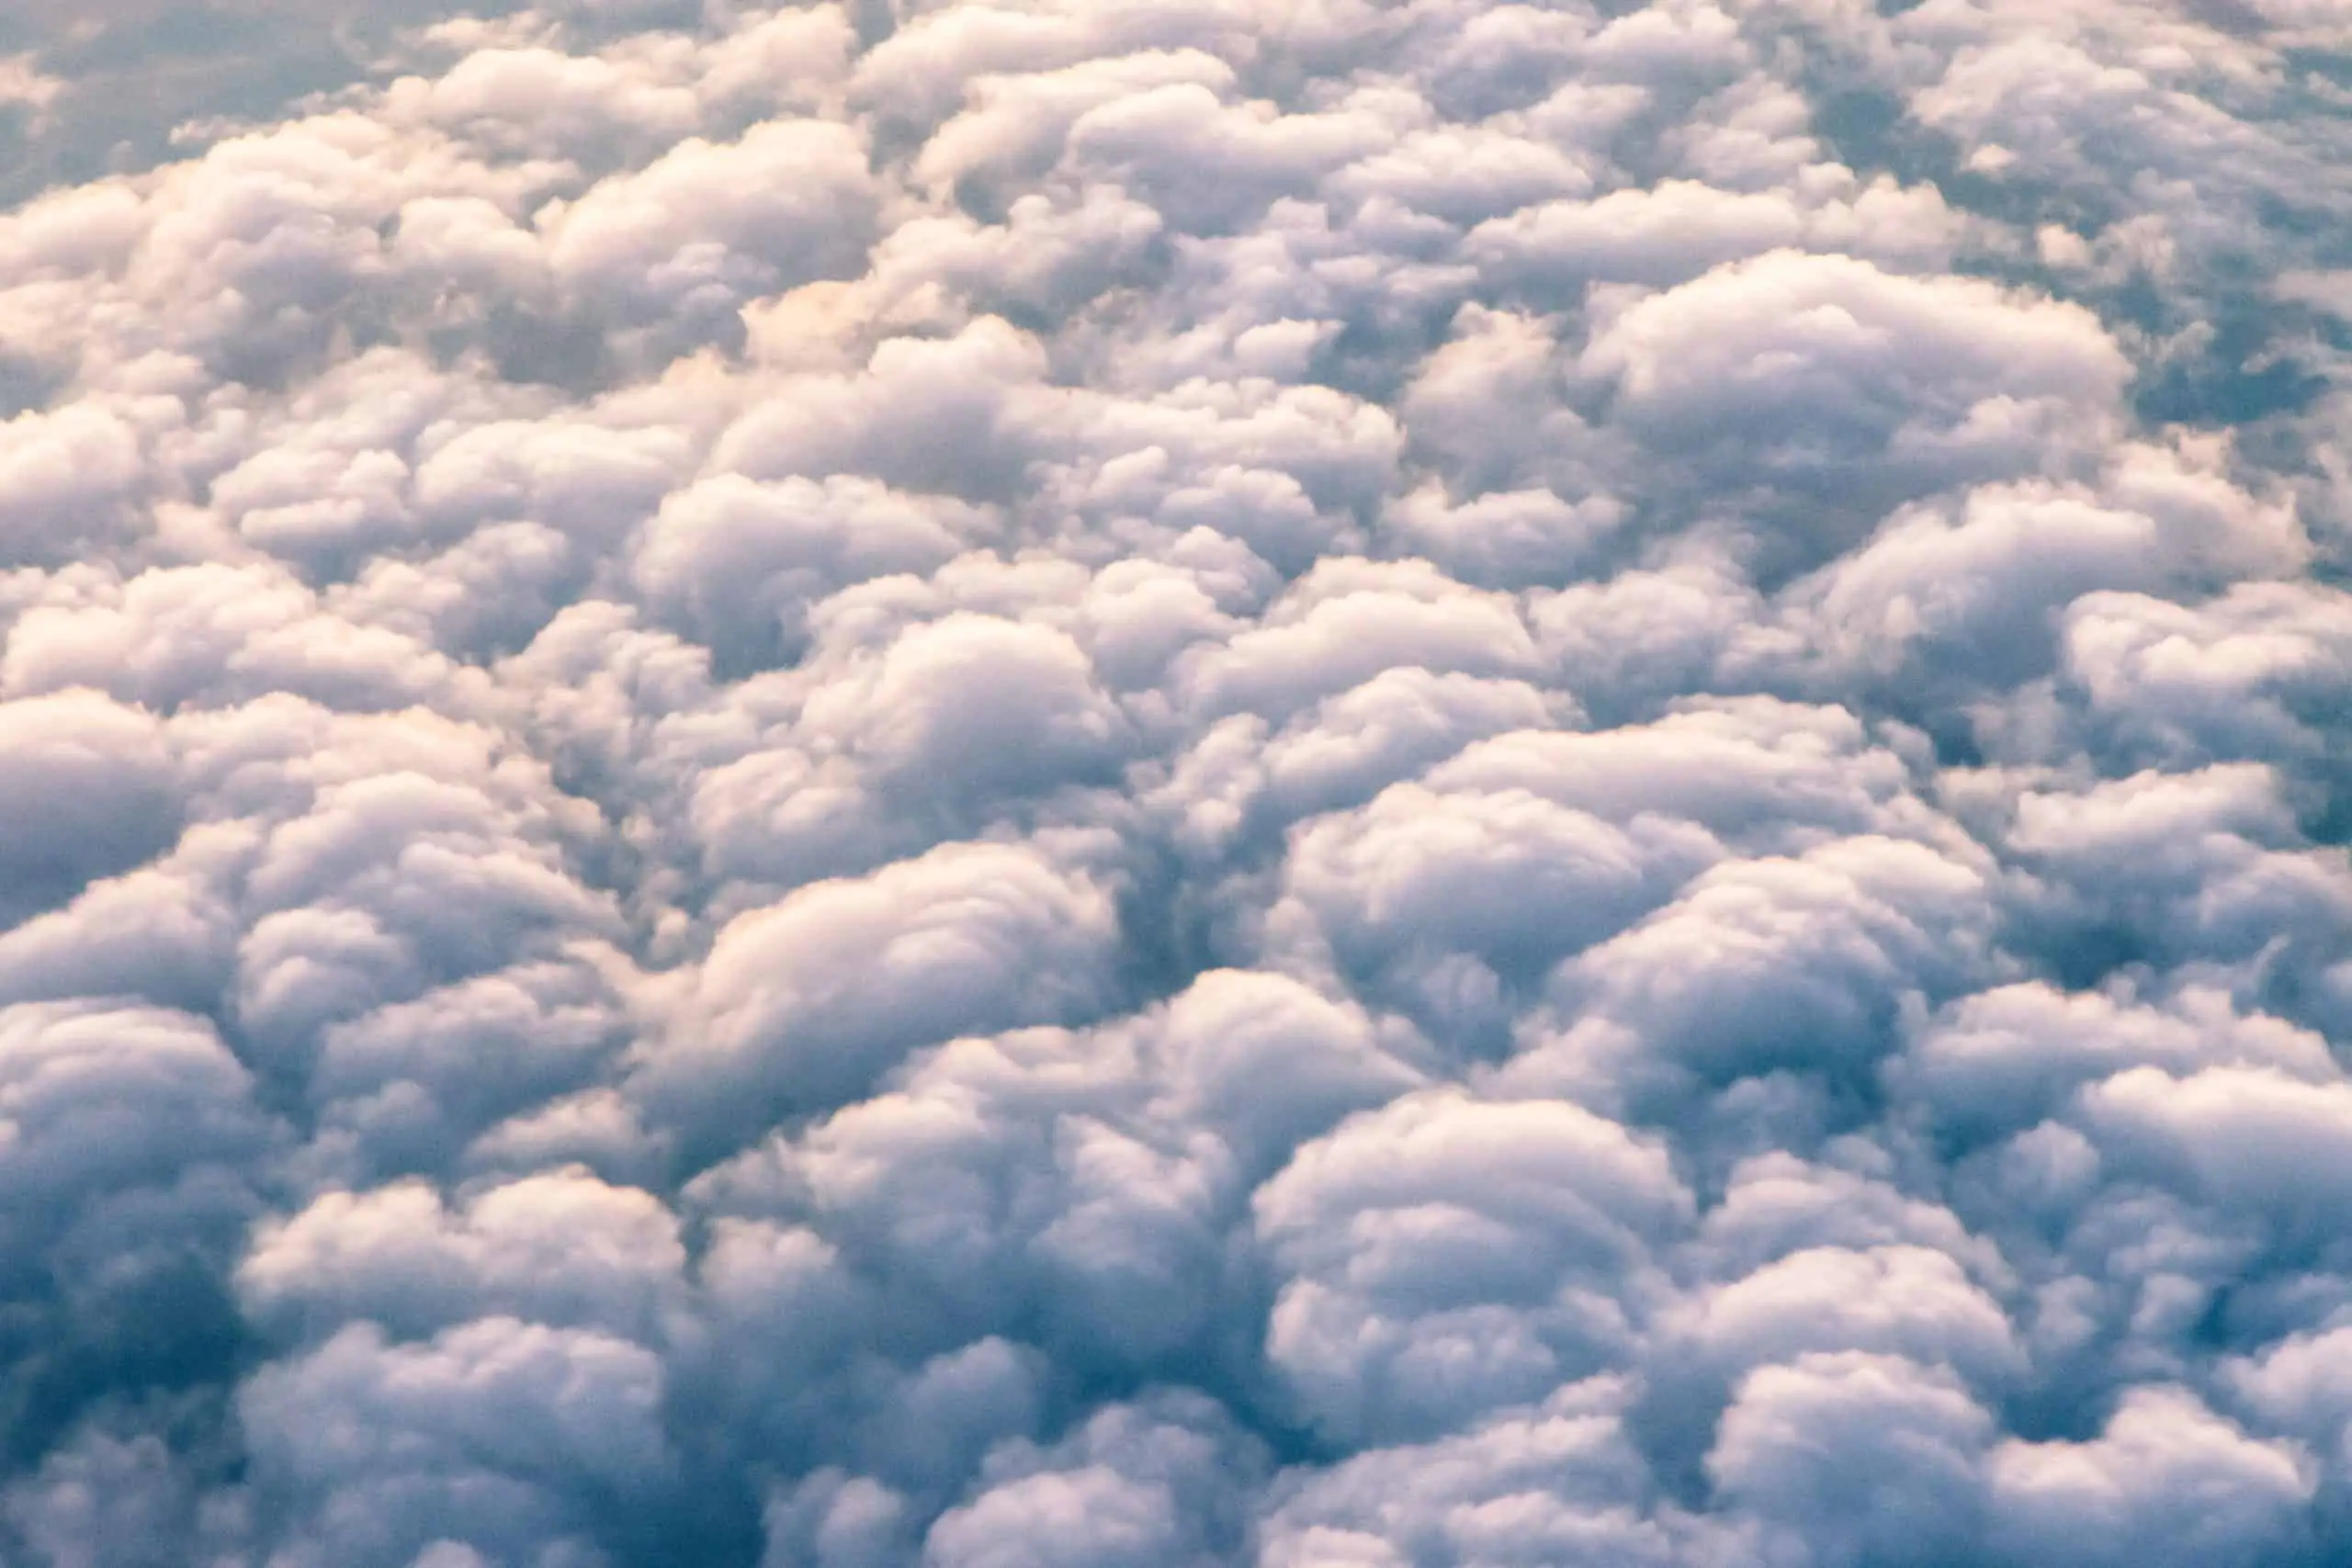 Photos from above the clouds